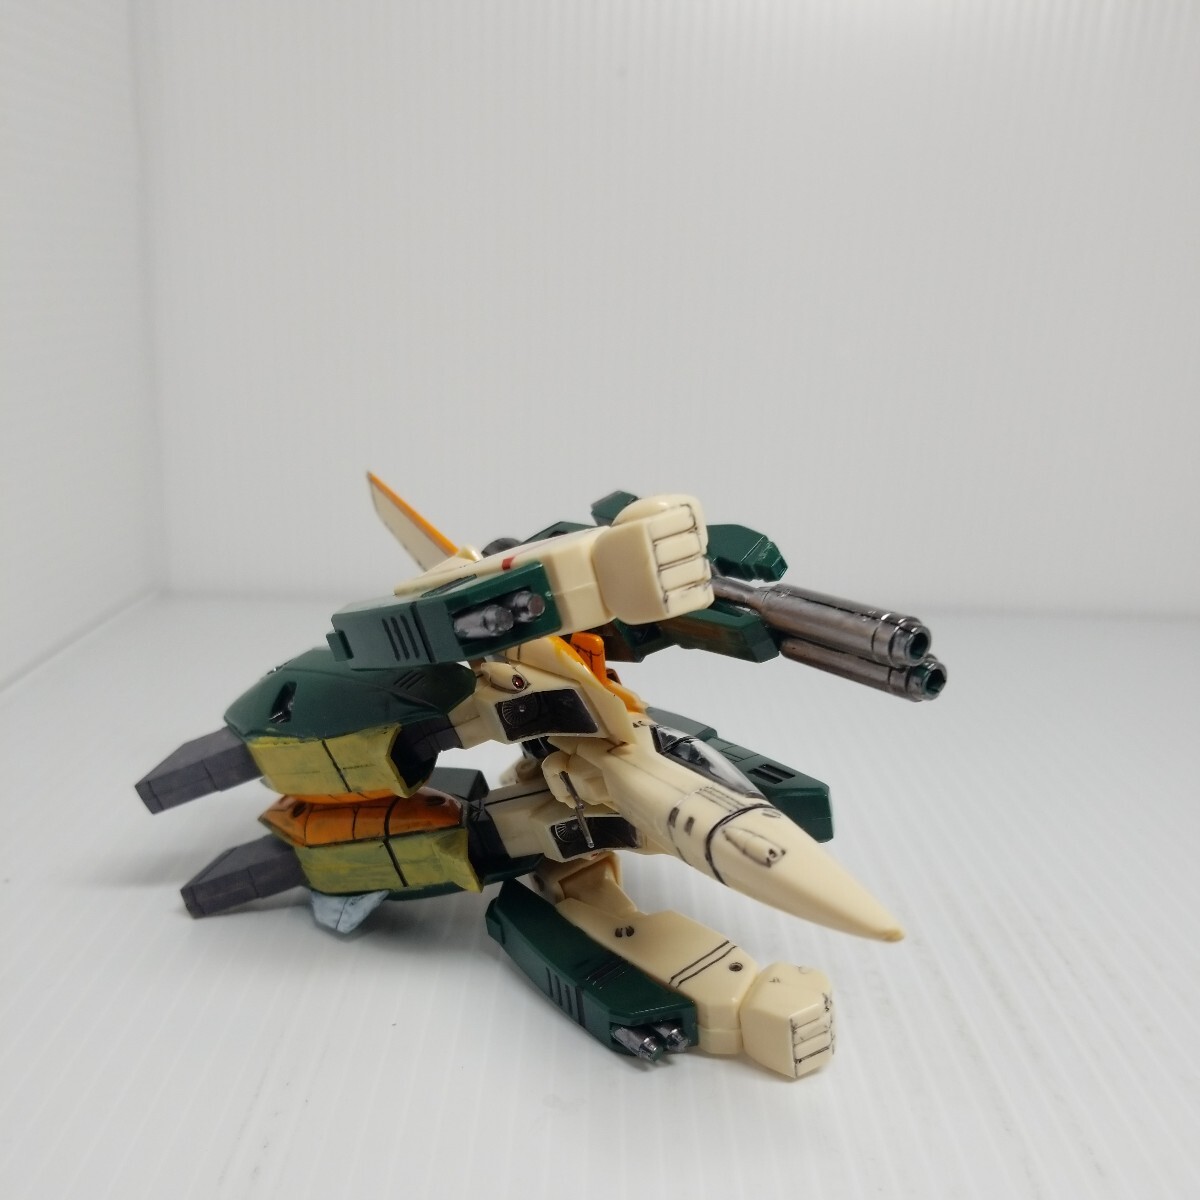 R-70g 4/27 旧キット 塗装品 マクロス 同梱可 ジャンク_画像8